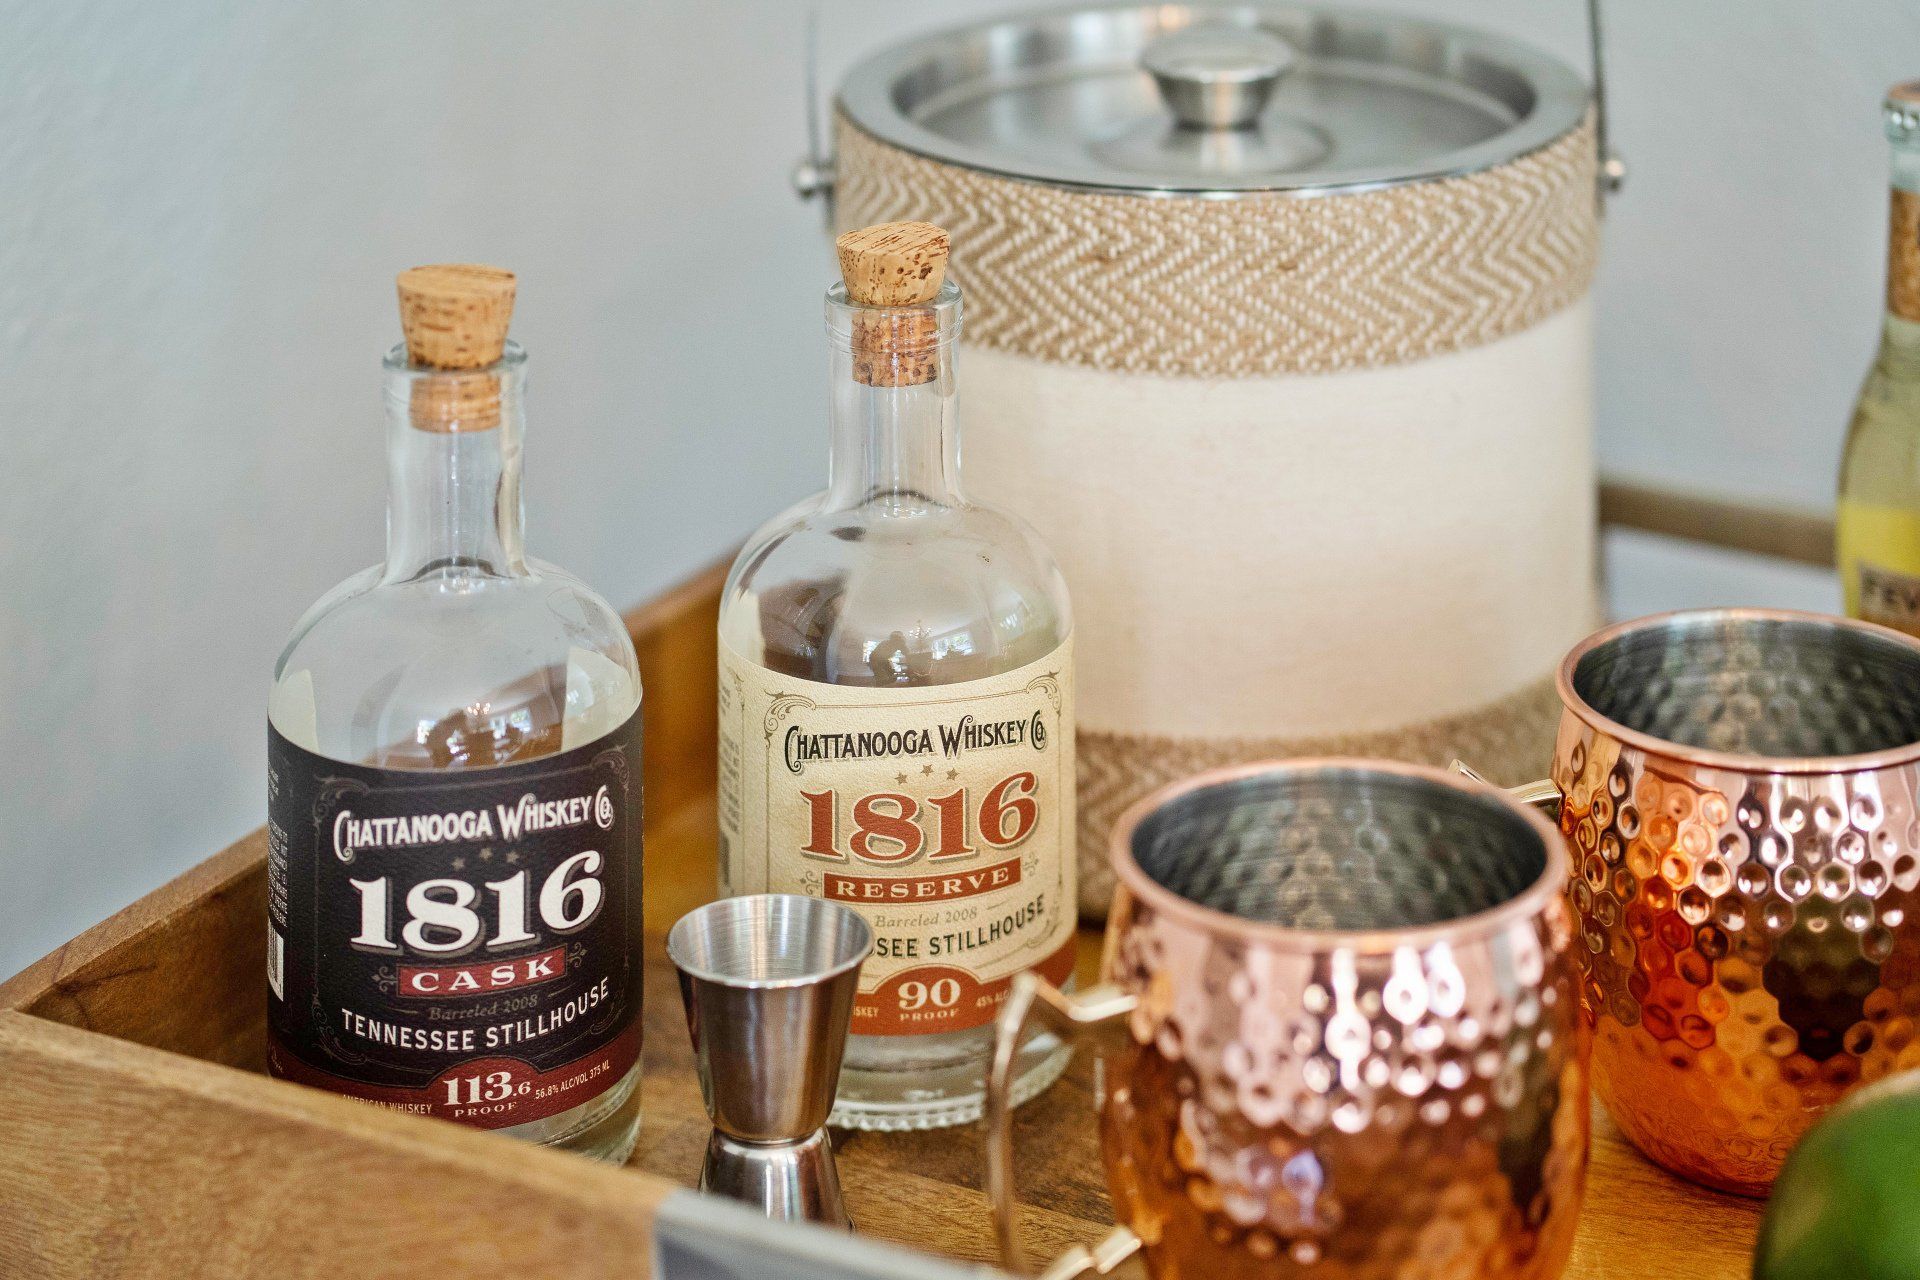 Bar Cart with Chattanooga Whisky and copper mugs, Chattanooga Product Photographer